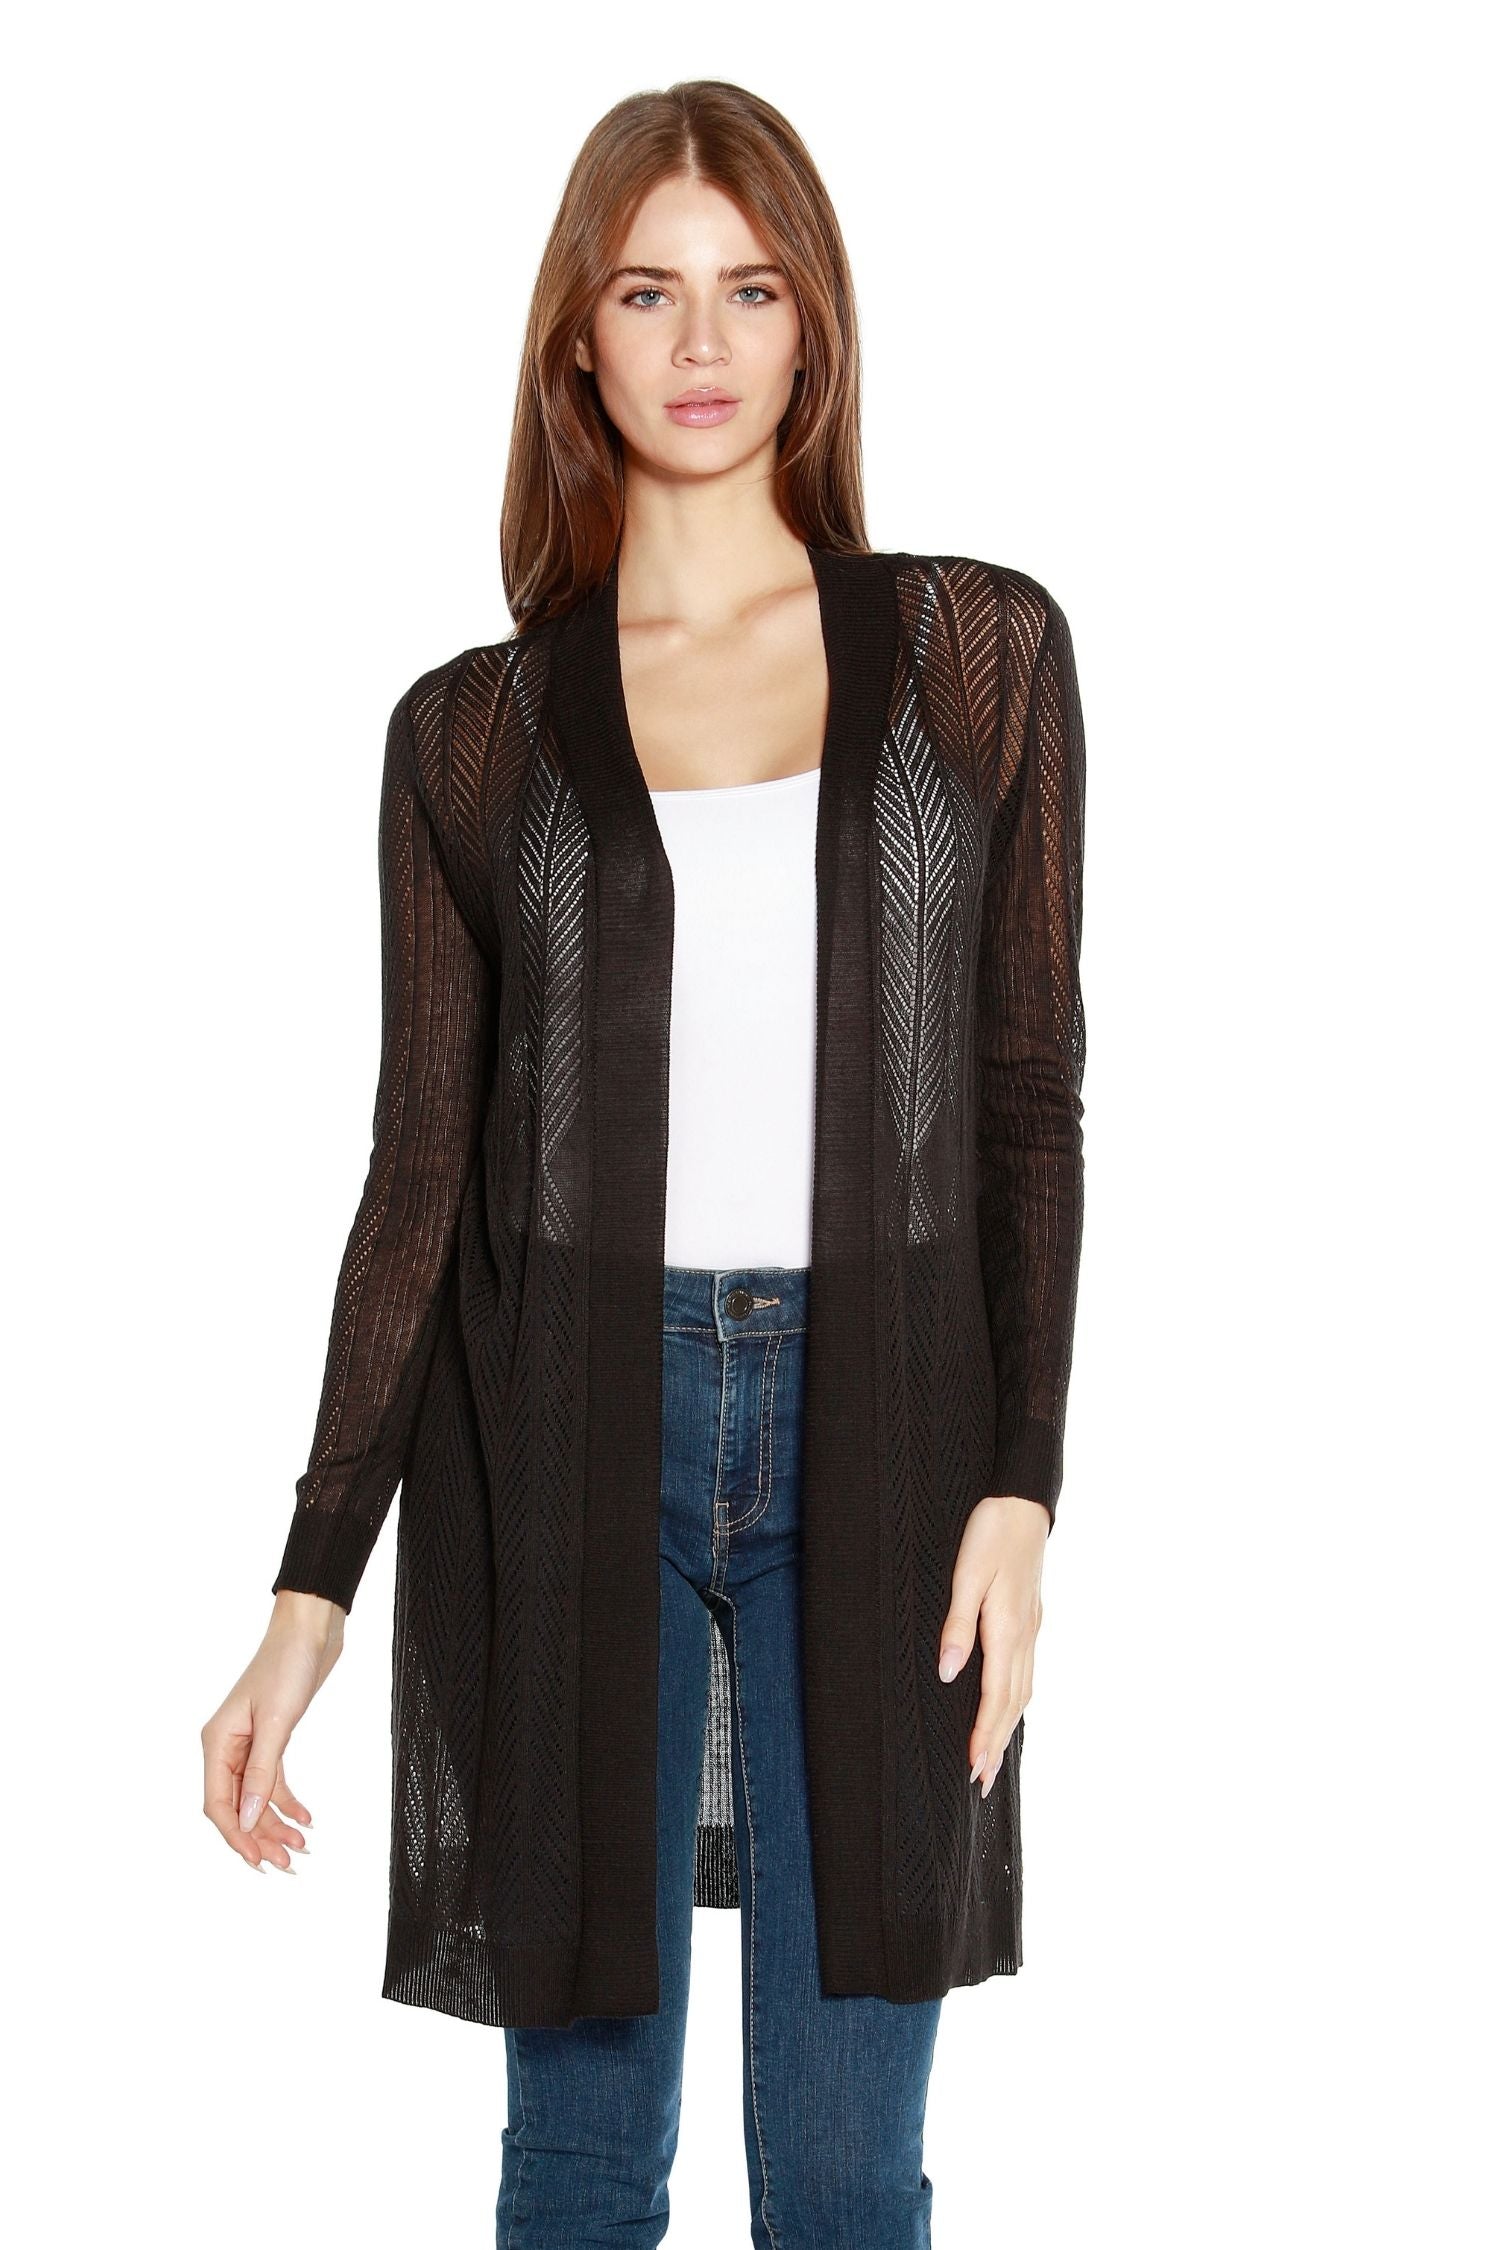 Women’s Semi Sheer Long Cardigan with Chevron Stripes and Pointelle